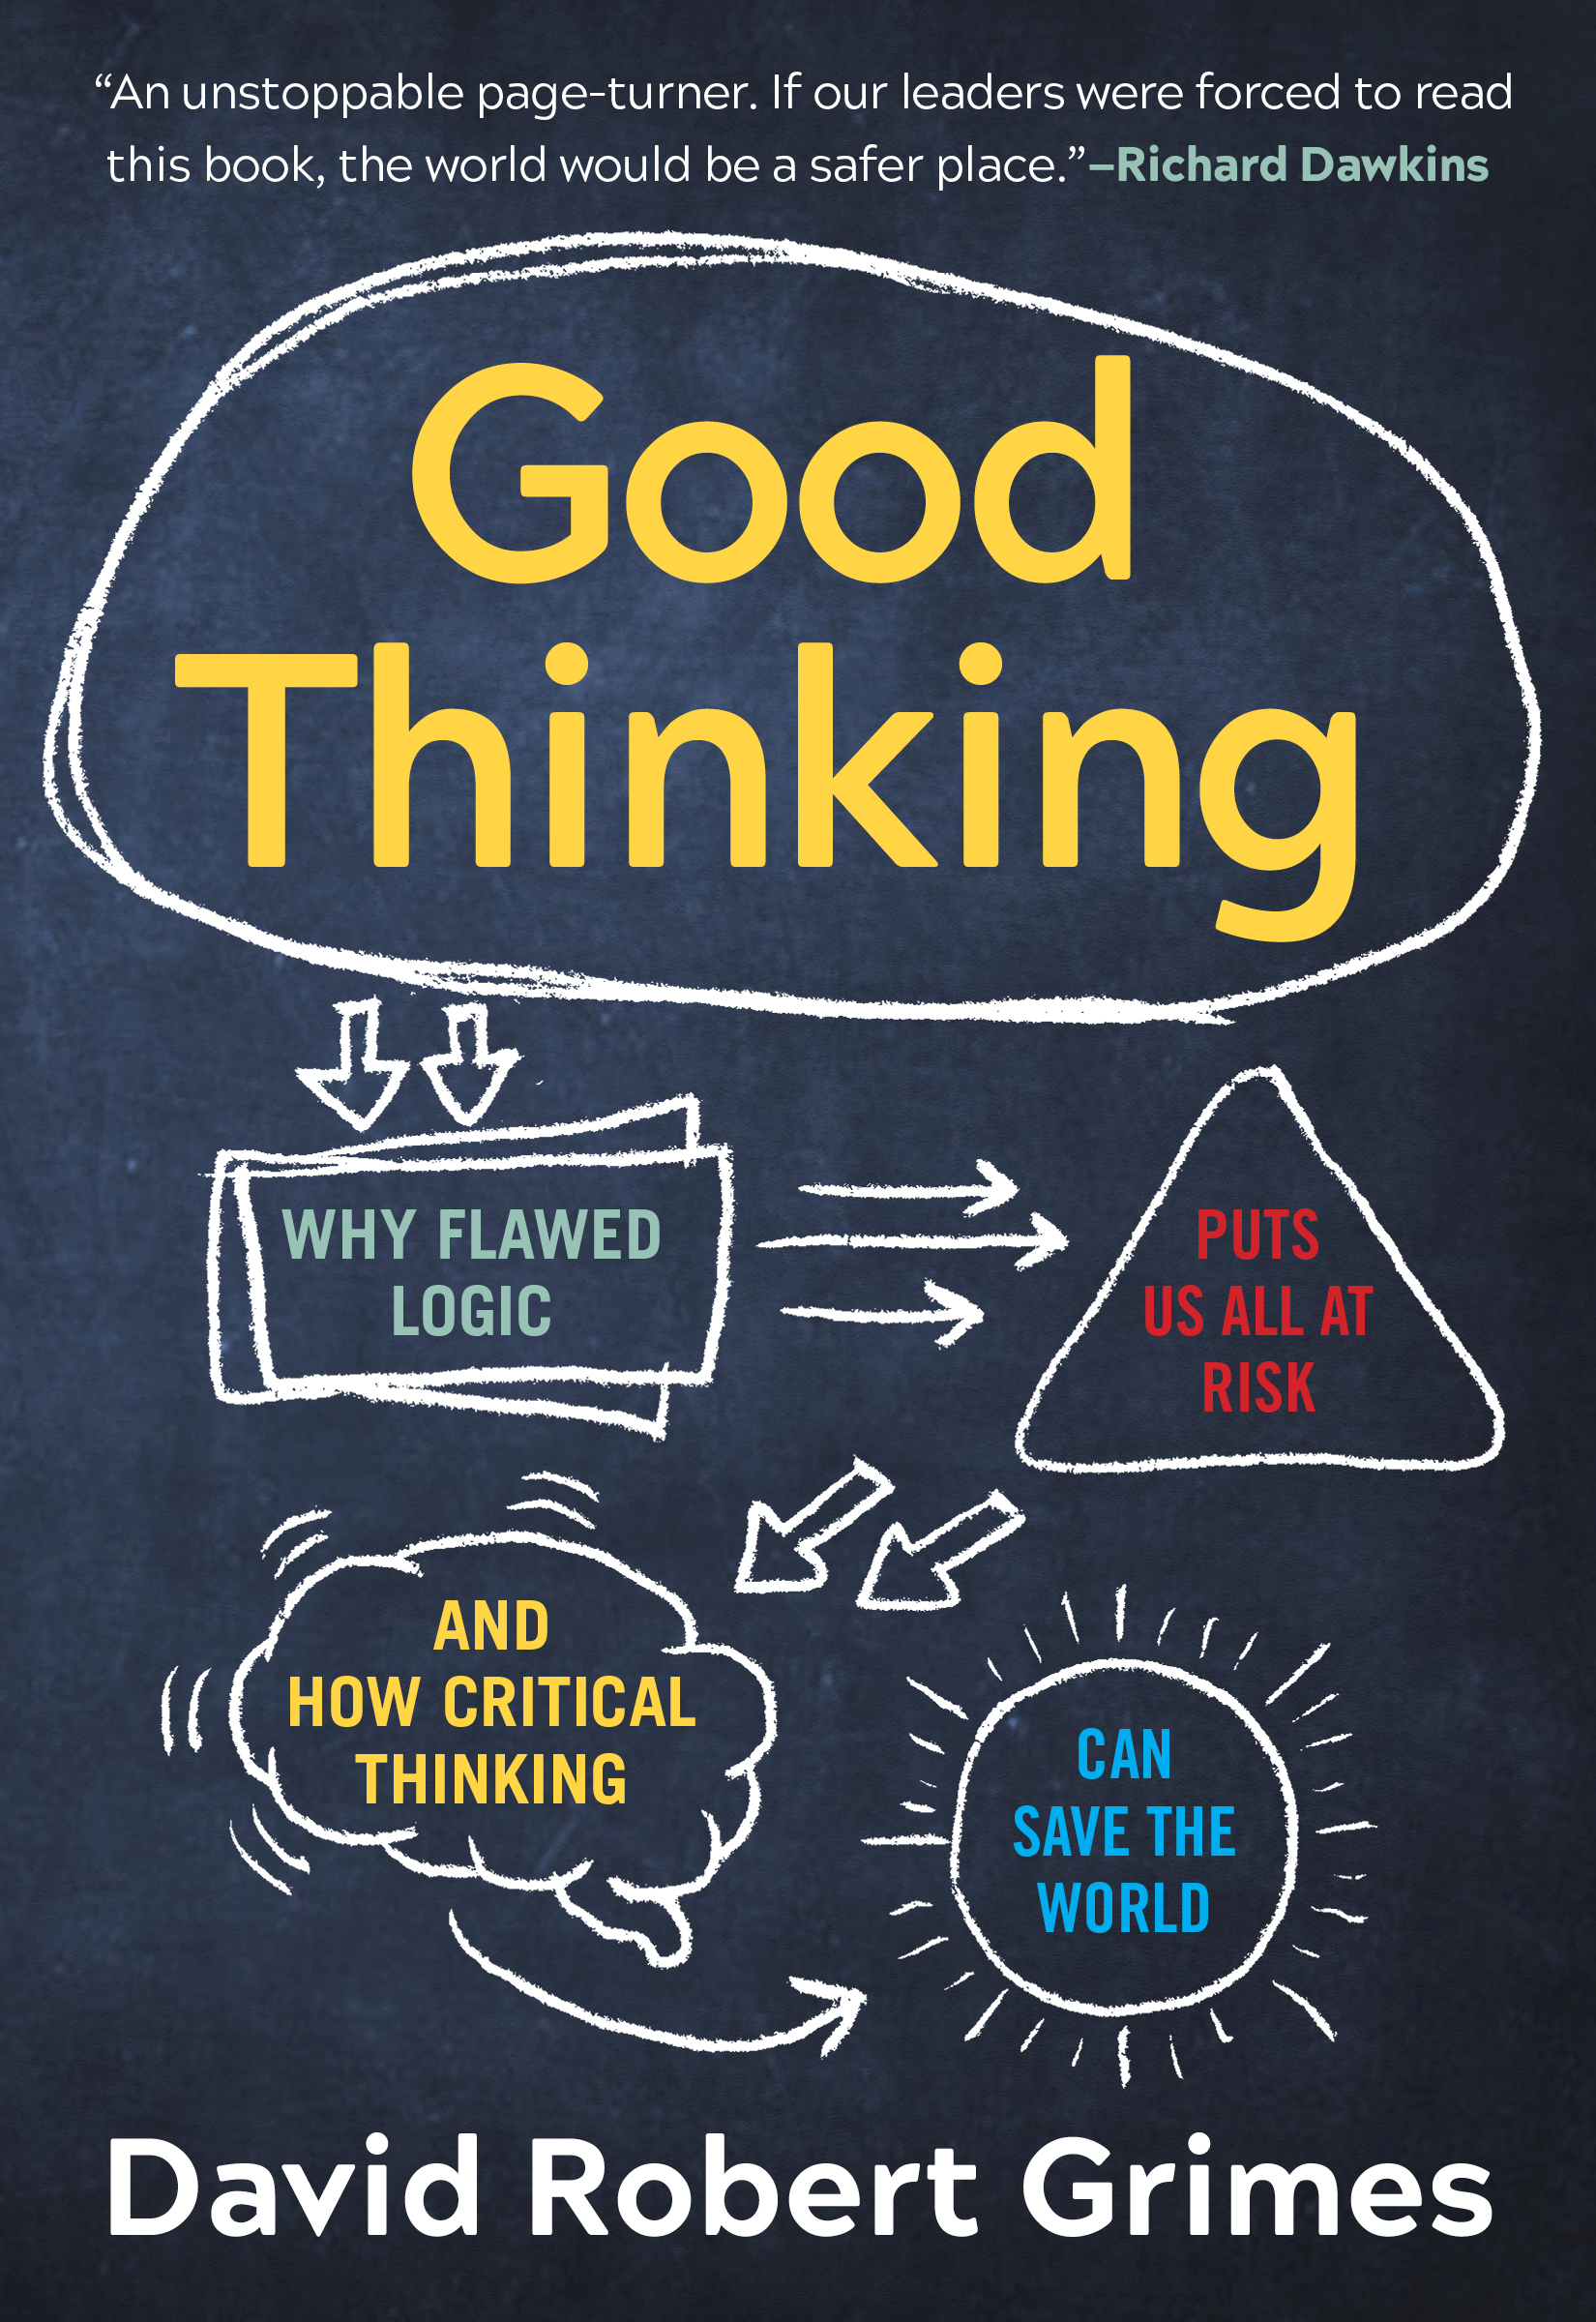 Good Thinking: Why Flawed Logic Puts Us All at Risk and How Critical Thinking Can Save the World by David Robert Grimes